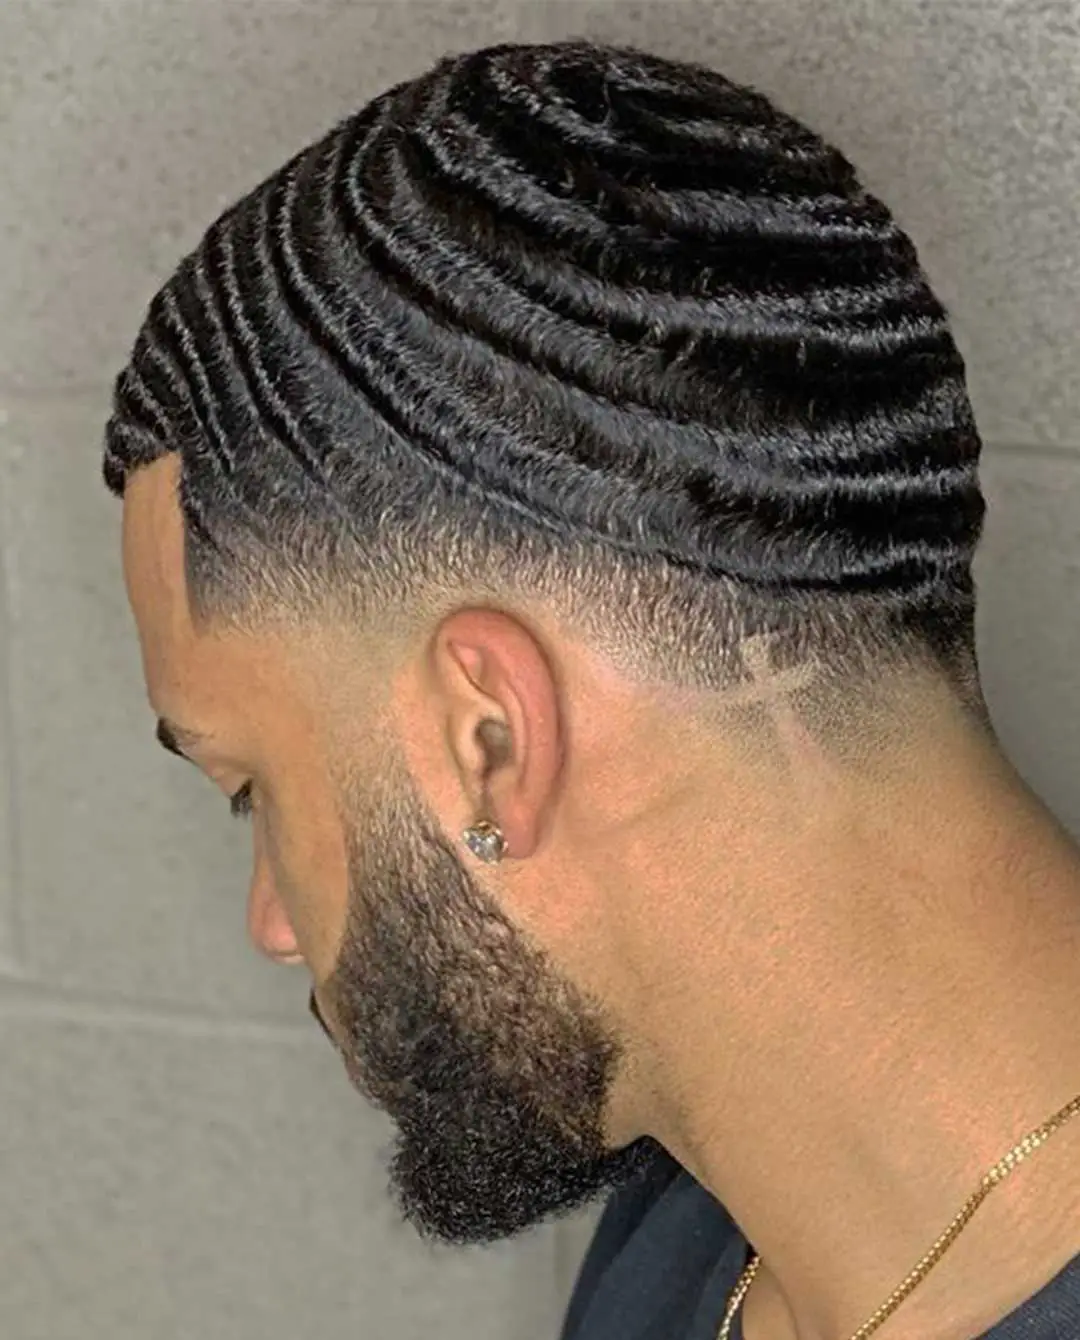 360 waves for black men | Waves hairstyle - Afroculture.net